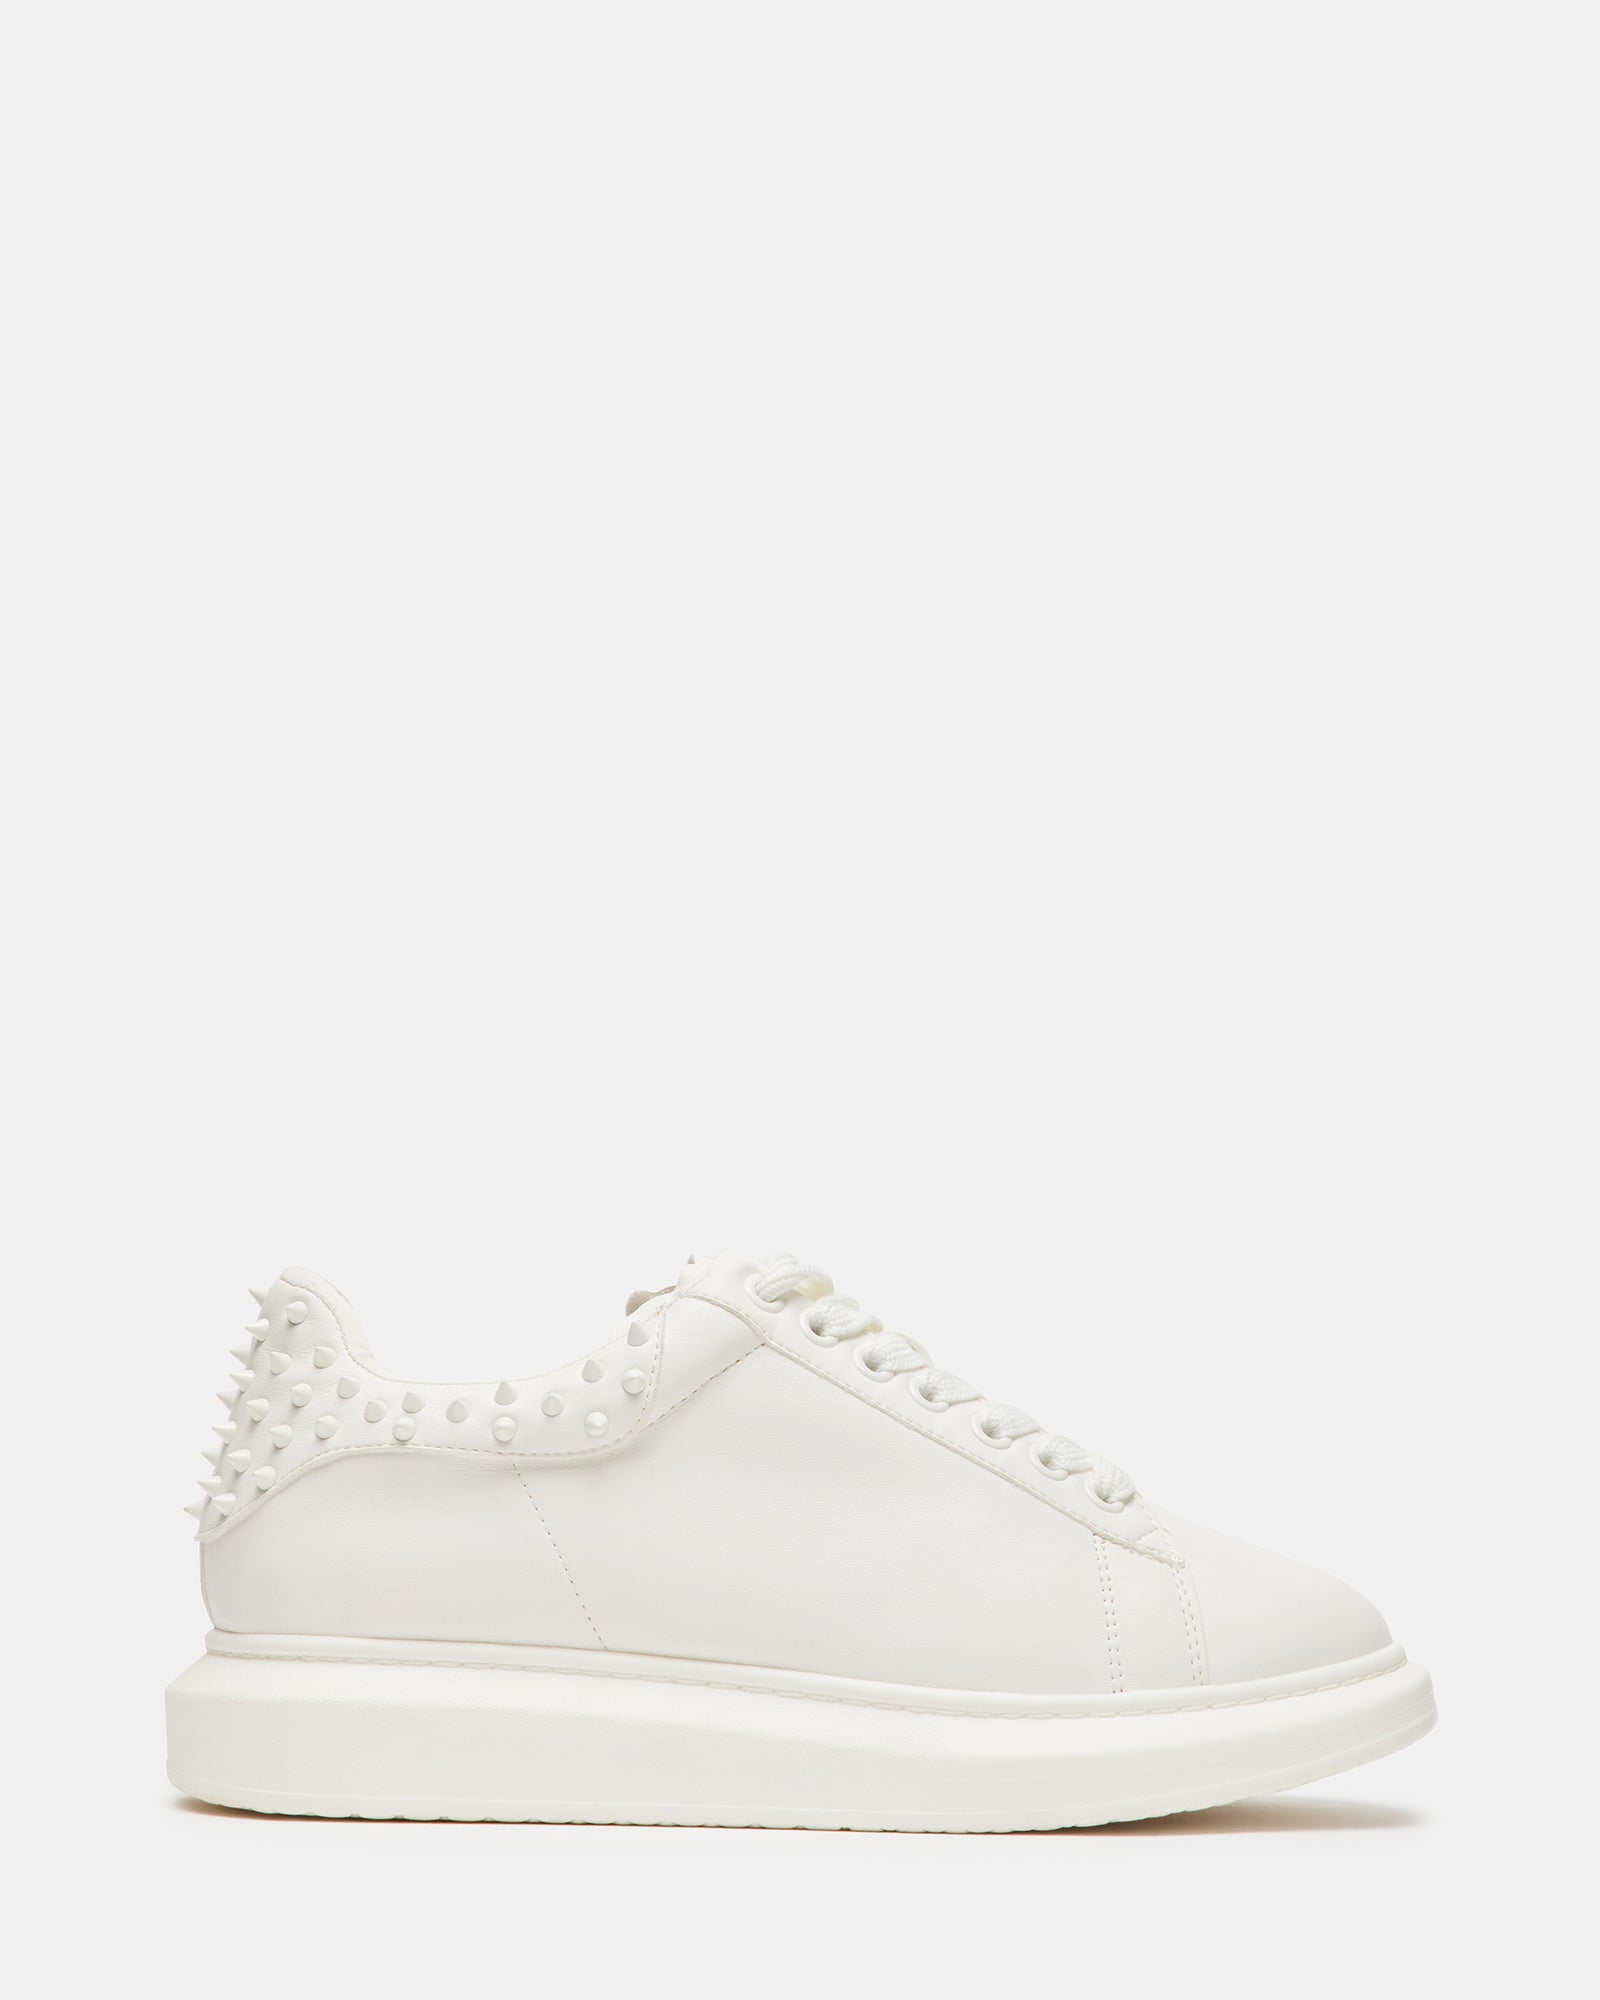 FROSTED White Multi Low-Top Lace-Up Sneaker | Men's Sneakers – Steve Madden